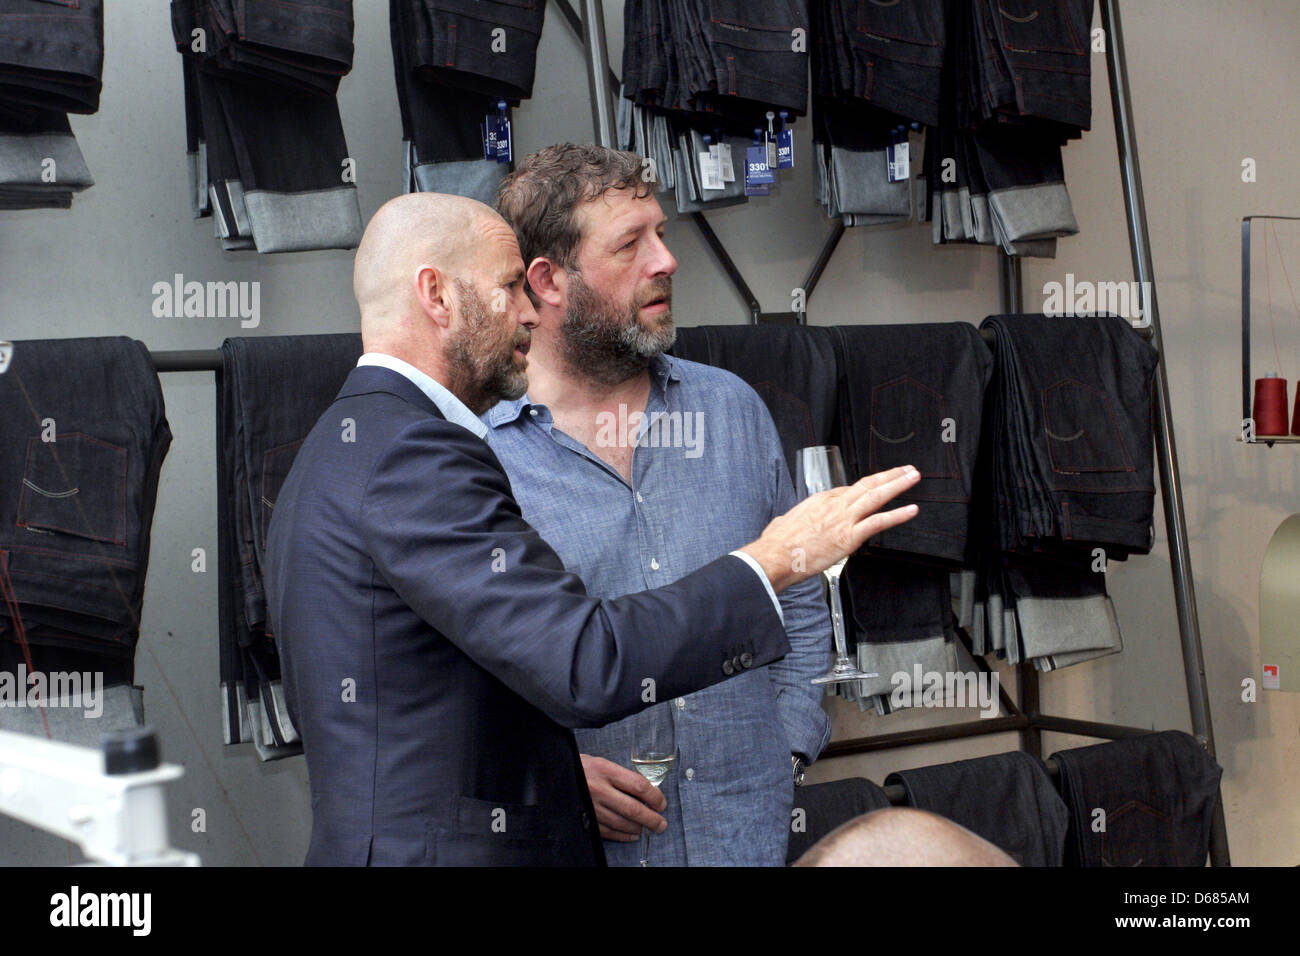 Head of the jeans label G Star, Jos van Tilburg, talks to head of B&B, Karl  Heinz Mueller (R) at a booth of the label at the fashion fair Bread & Butter